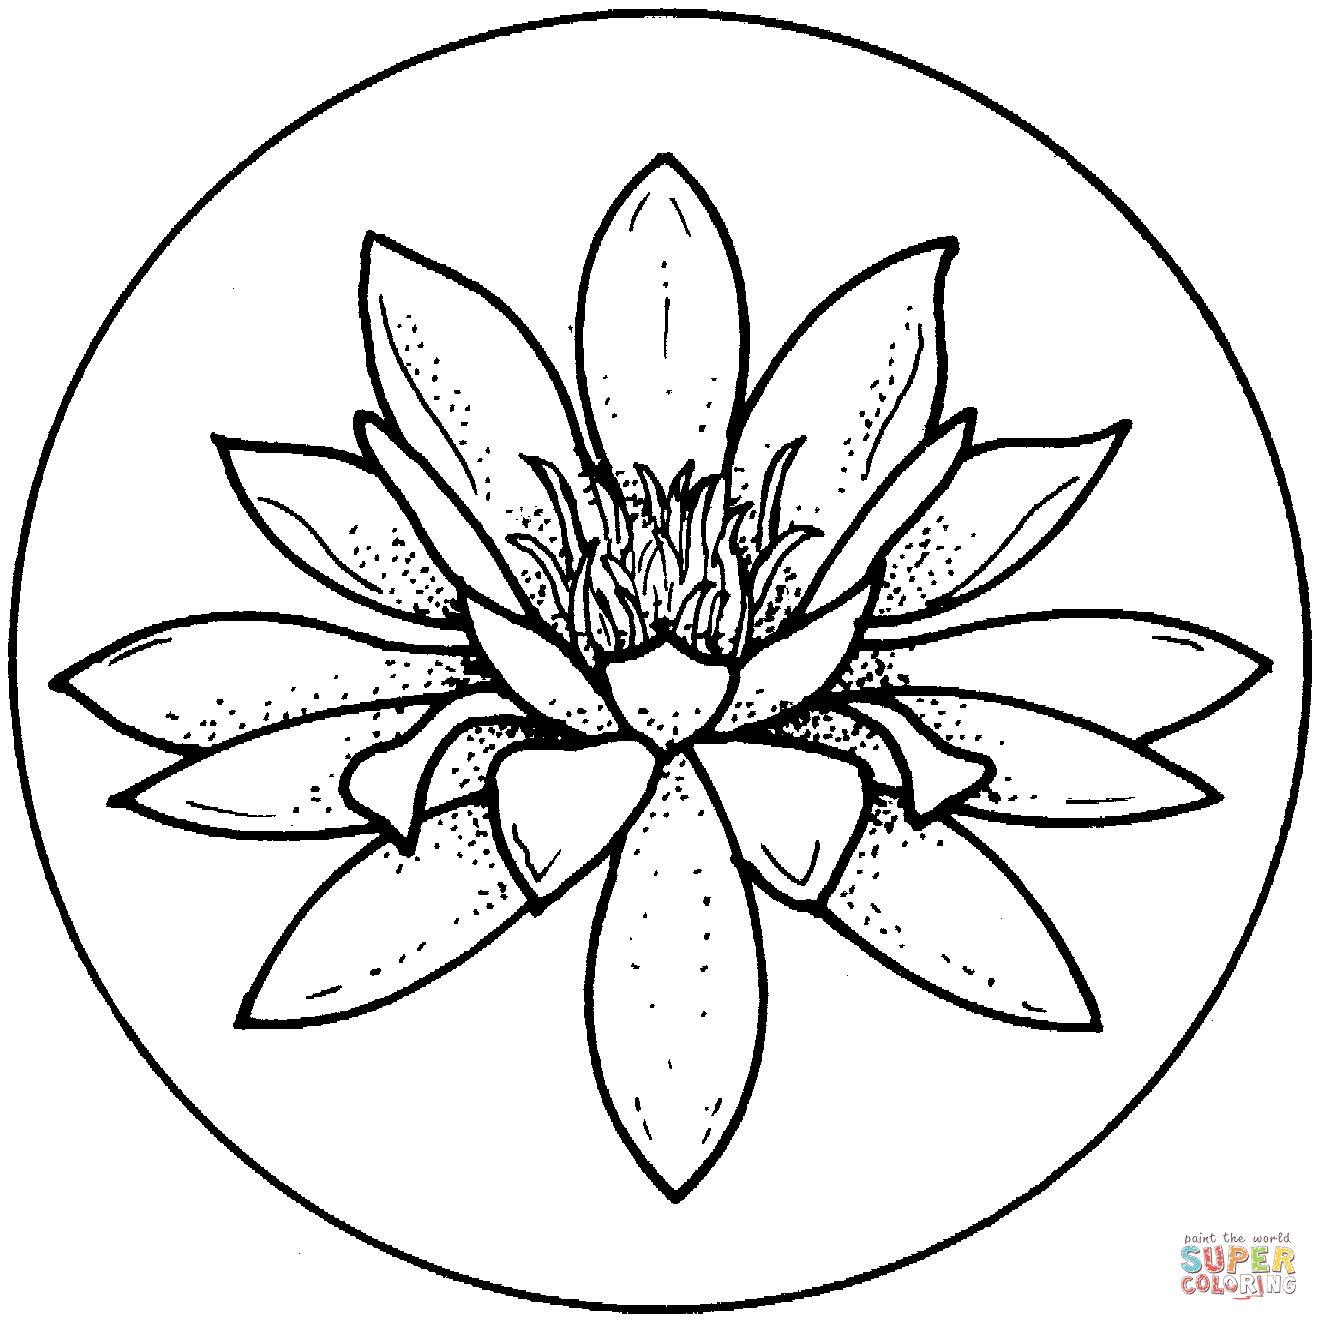 Water lily blossom Coloring Pages